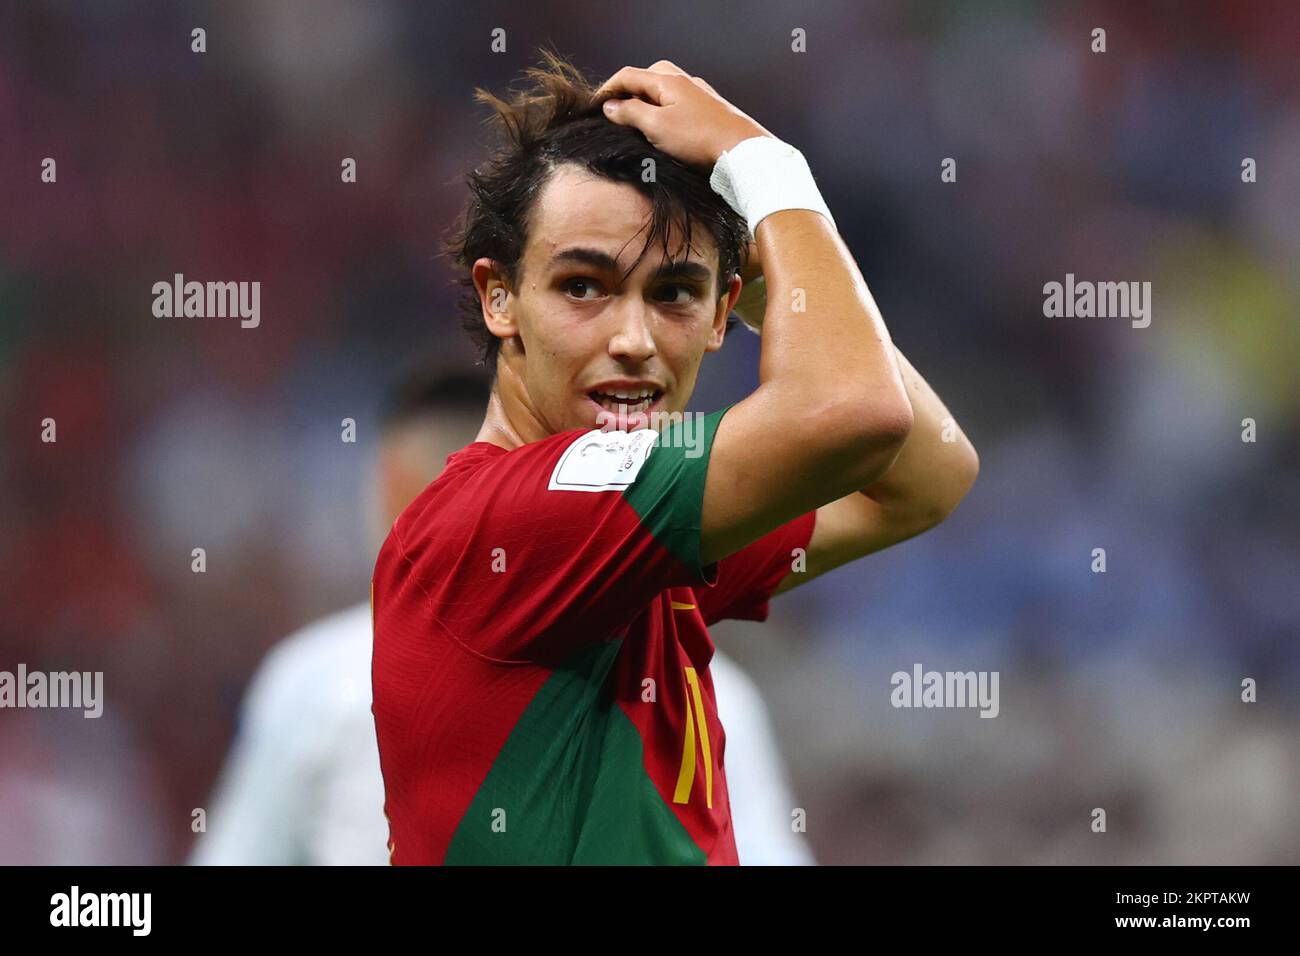 Lusail, Qatar. 28th Nov, 2022. Soccer, World Cup 2022 in Qatar, Portugal - Uruguay, preliminary round, Group H, Matchday 2, Lusail Stadium, Portugal's Joao Félix reacts. Credit: Tom Weller/dpa/Alamy Live News Stock Photo